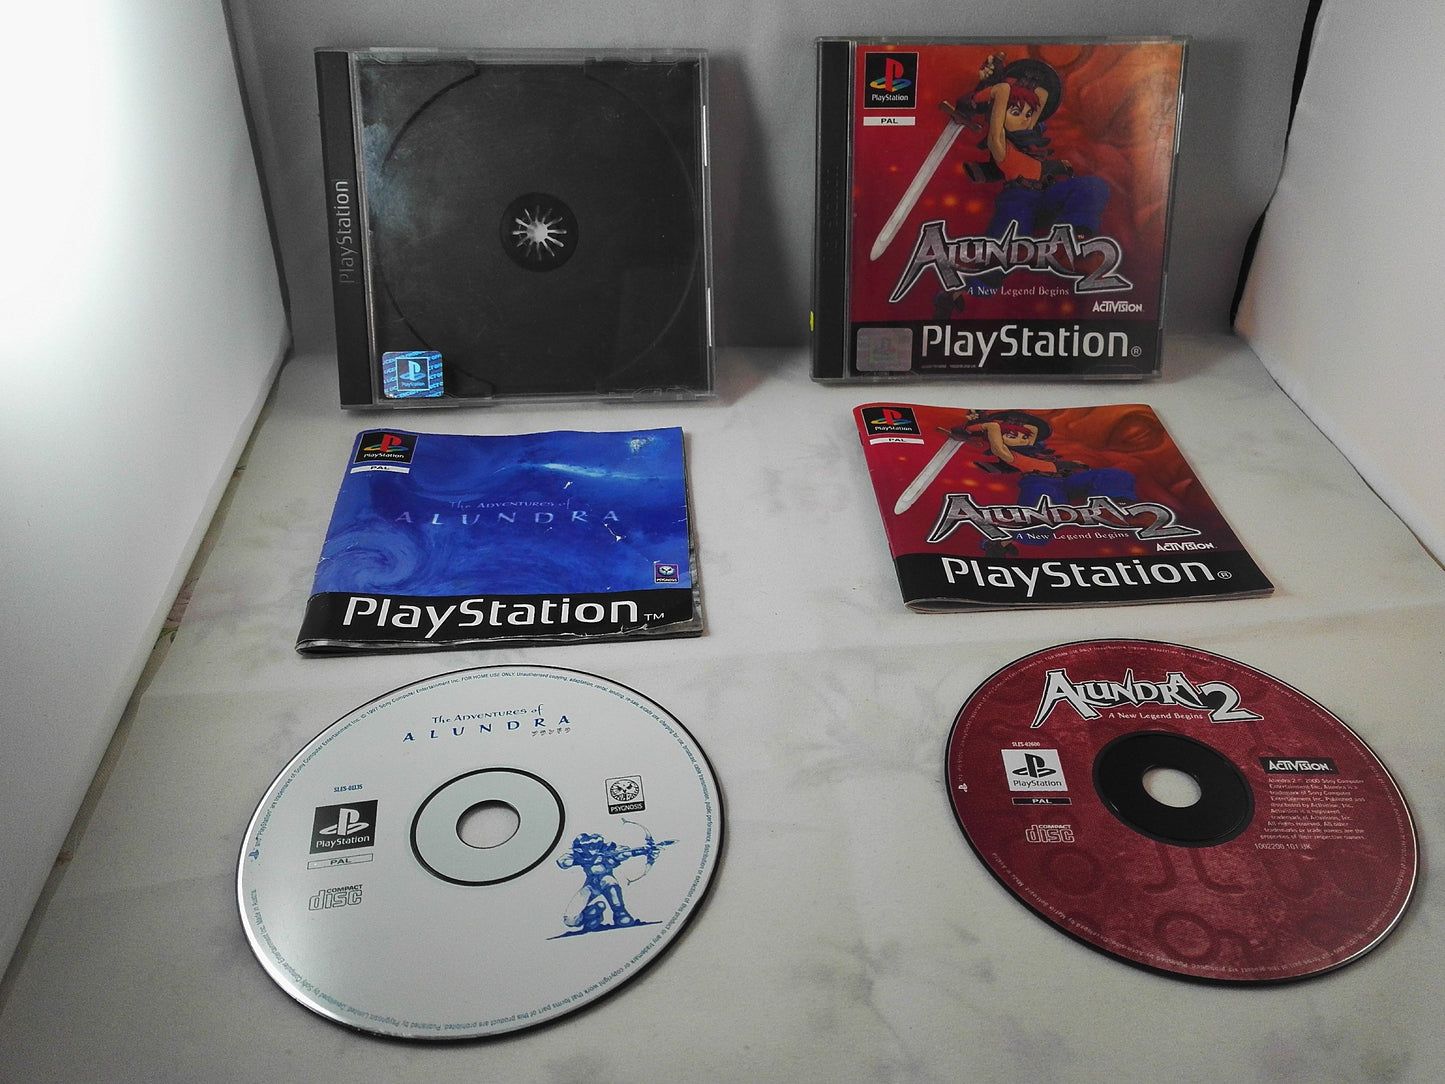 The Adventures of Alundra 1 & 2 (Sony PlayStation 1 game bundle)